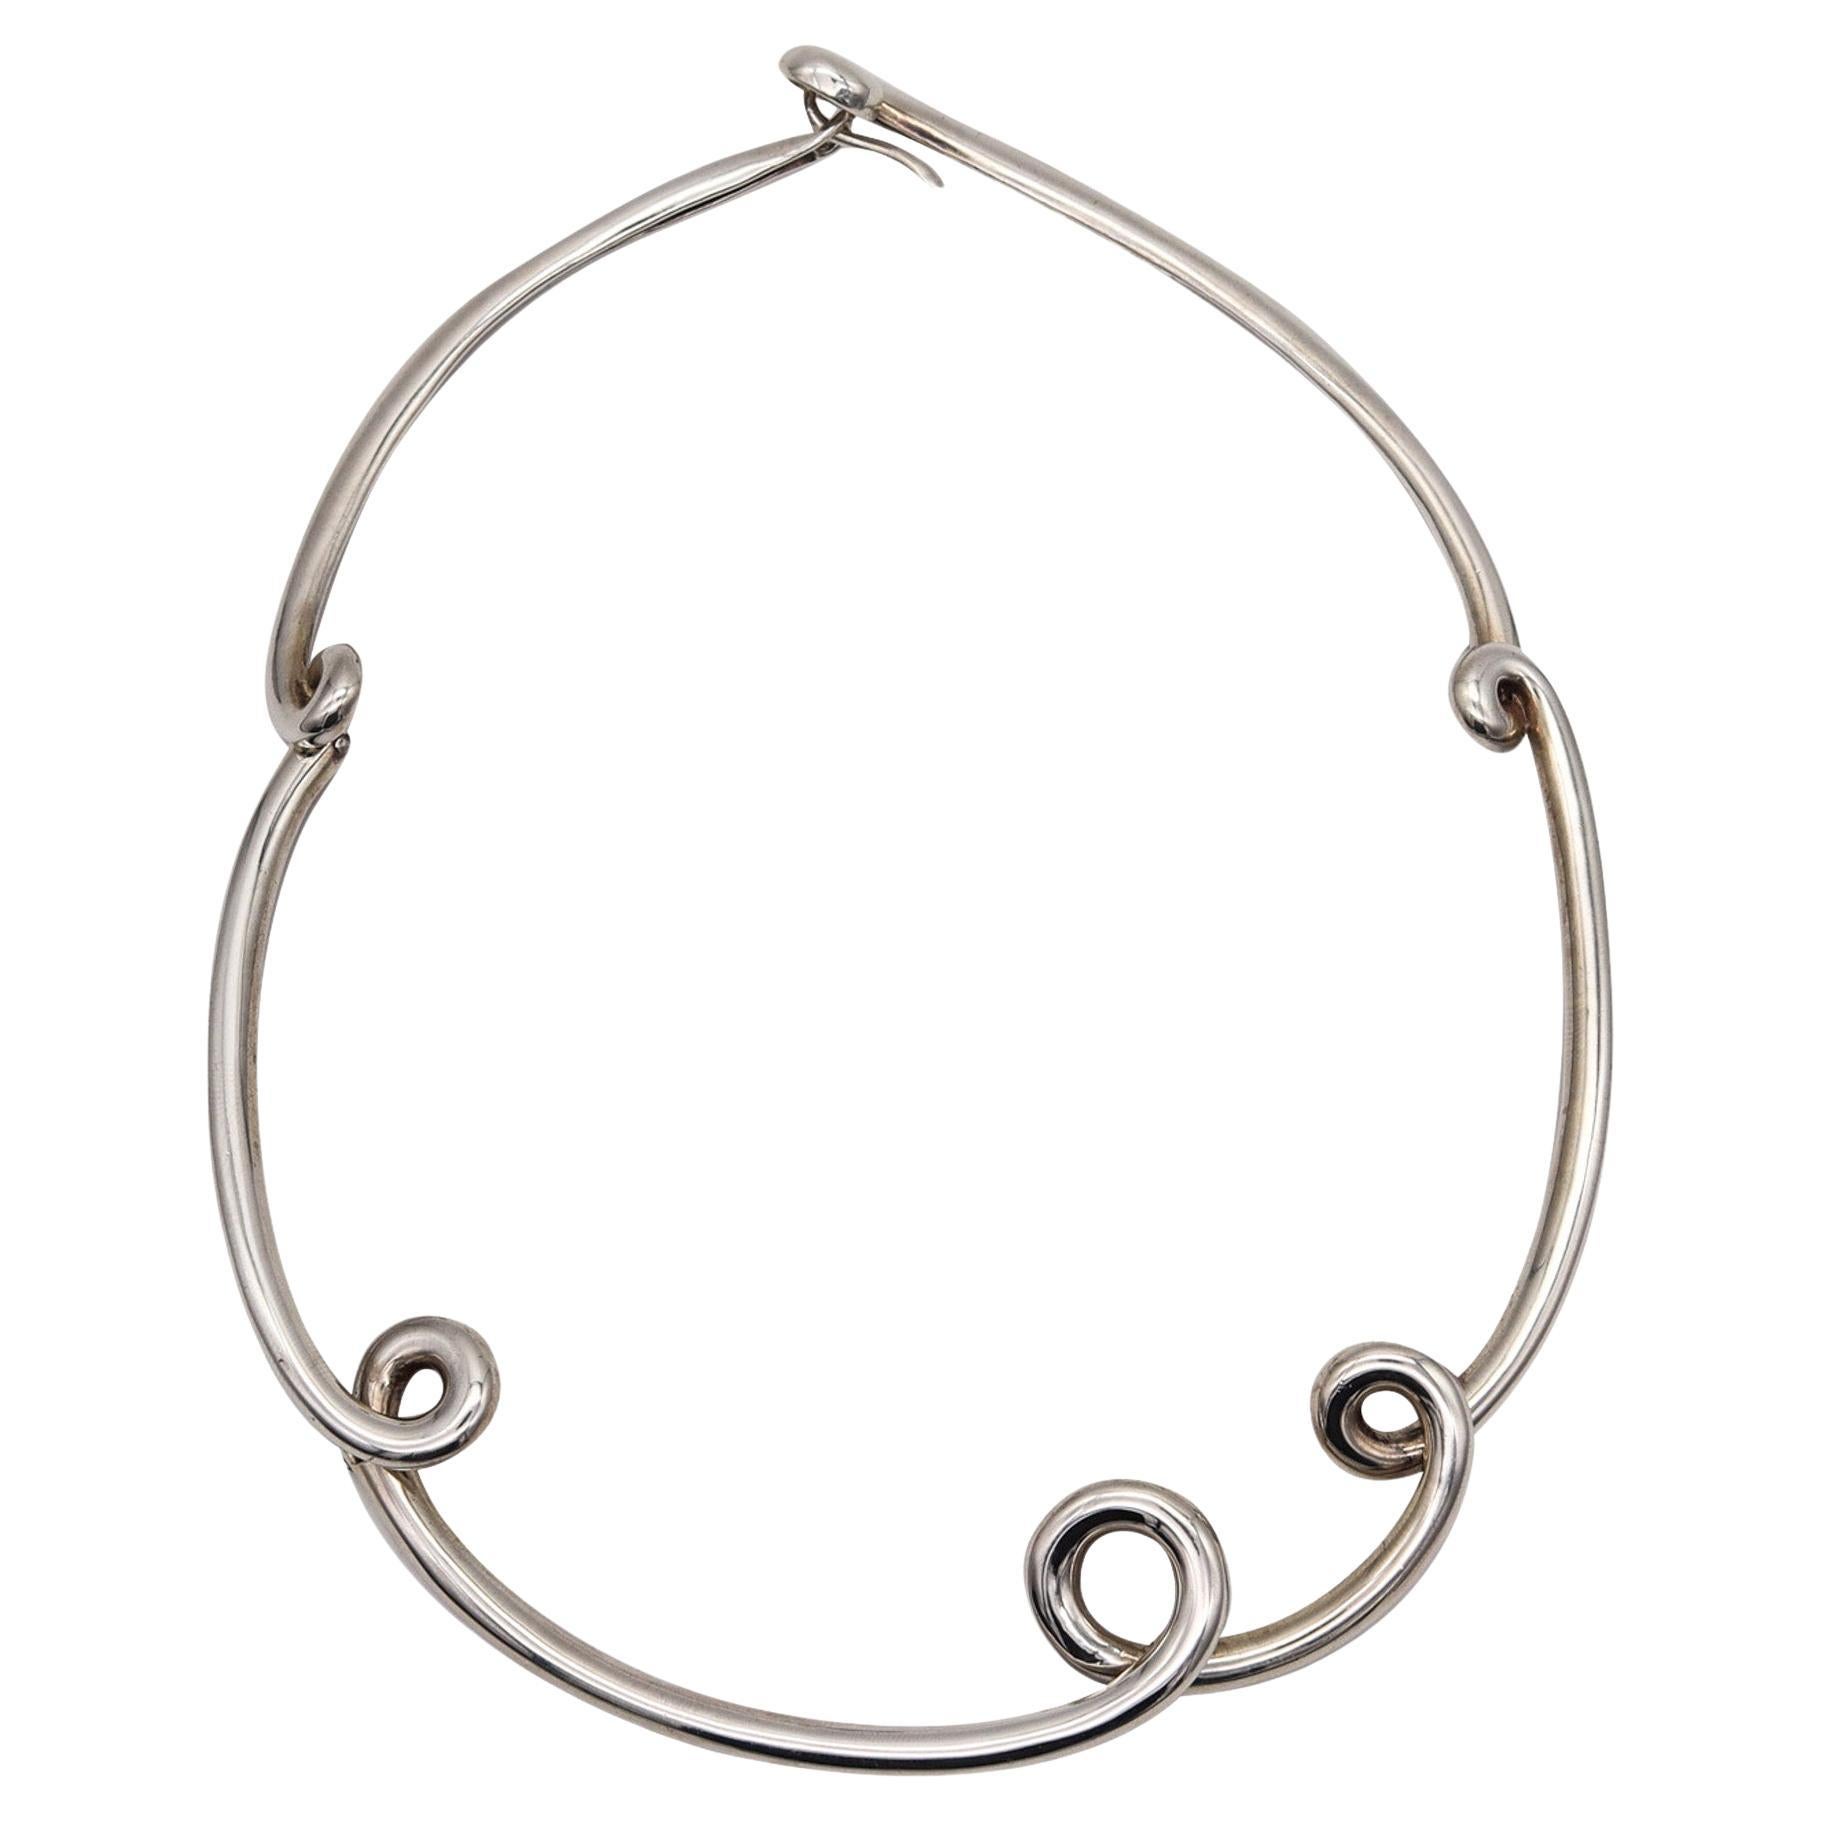 Angela Cummings 1991 Studio Twisted Free Form Necklace In .925 Sterling Silver